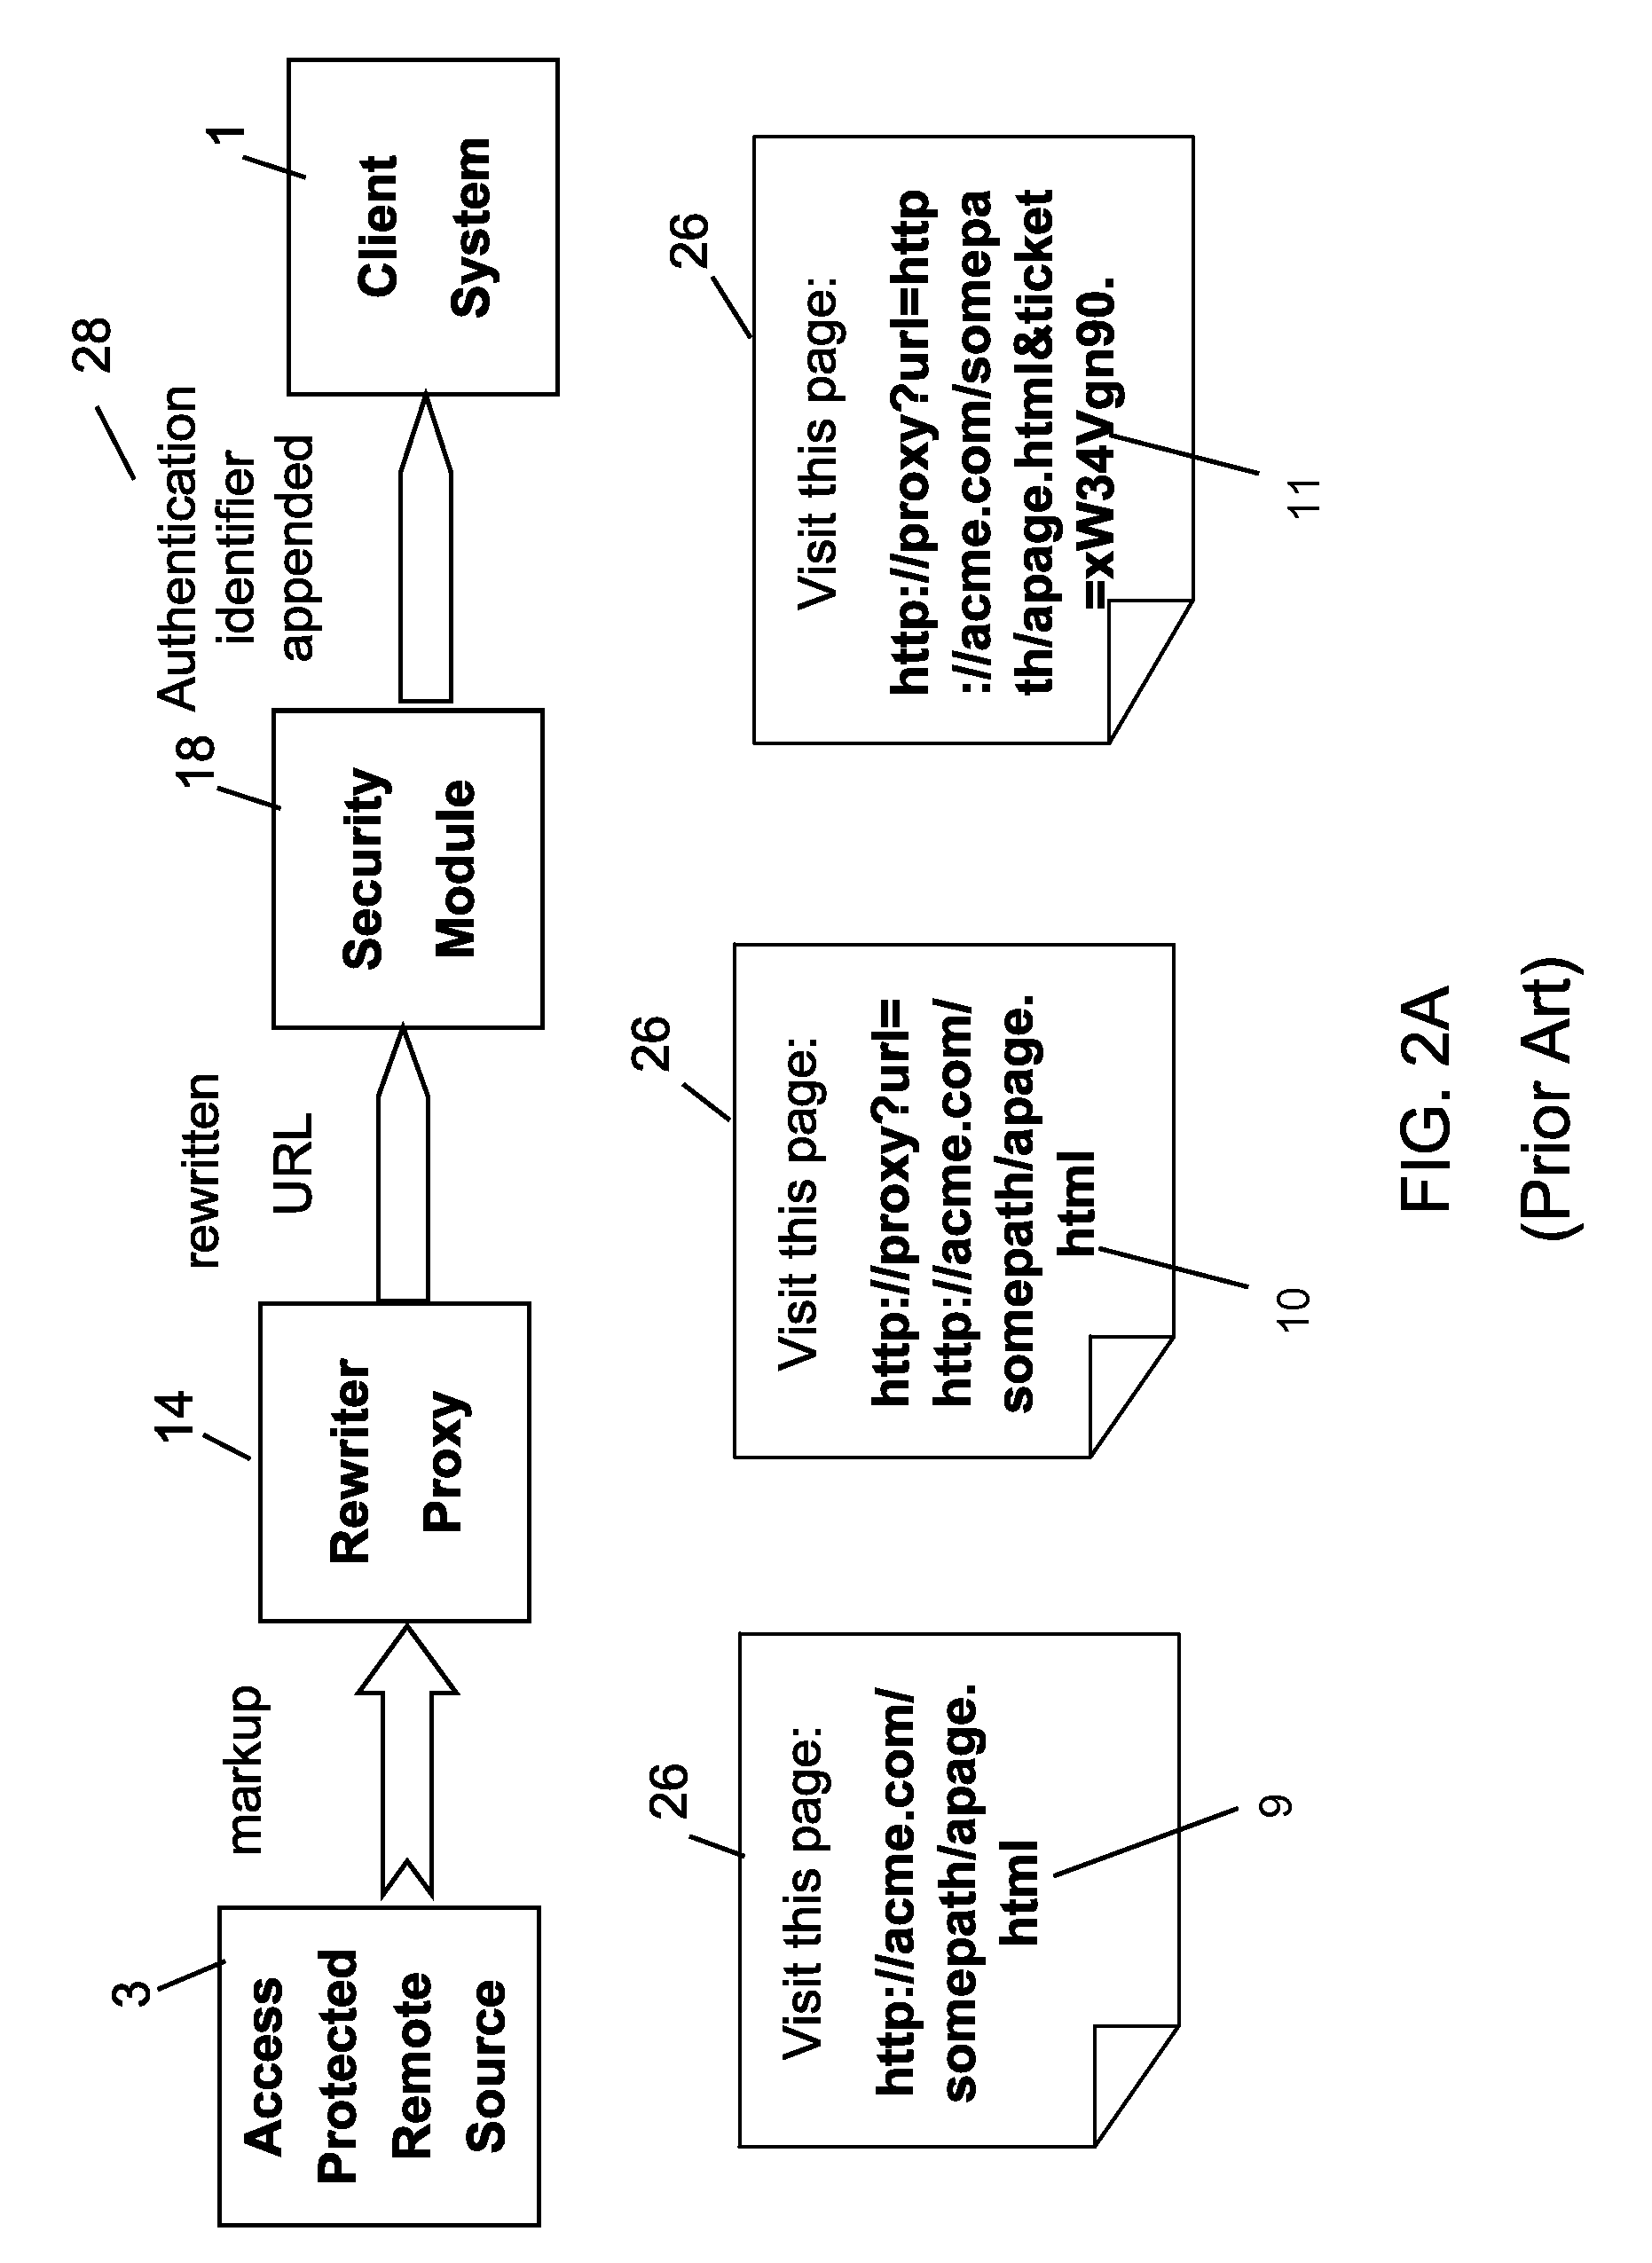 Controlling access of a client system to access protected remote resources supporting relative URLs